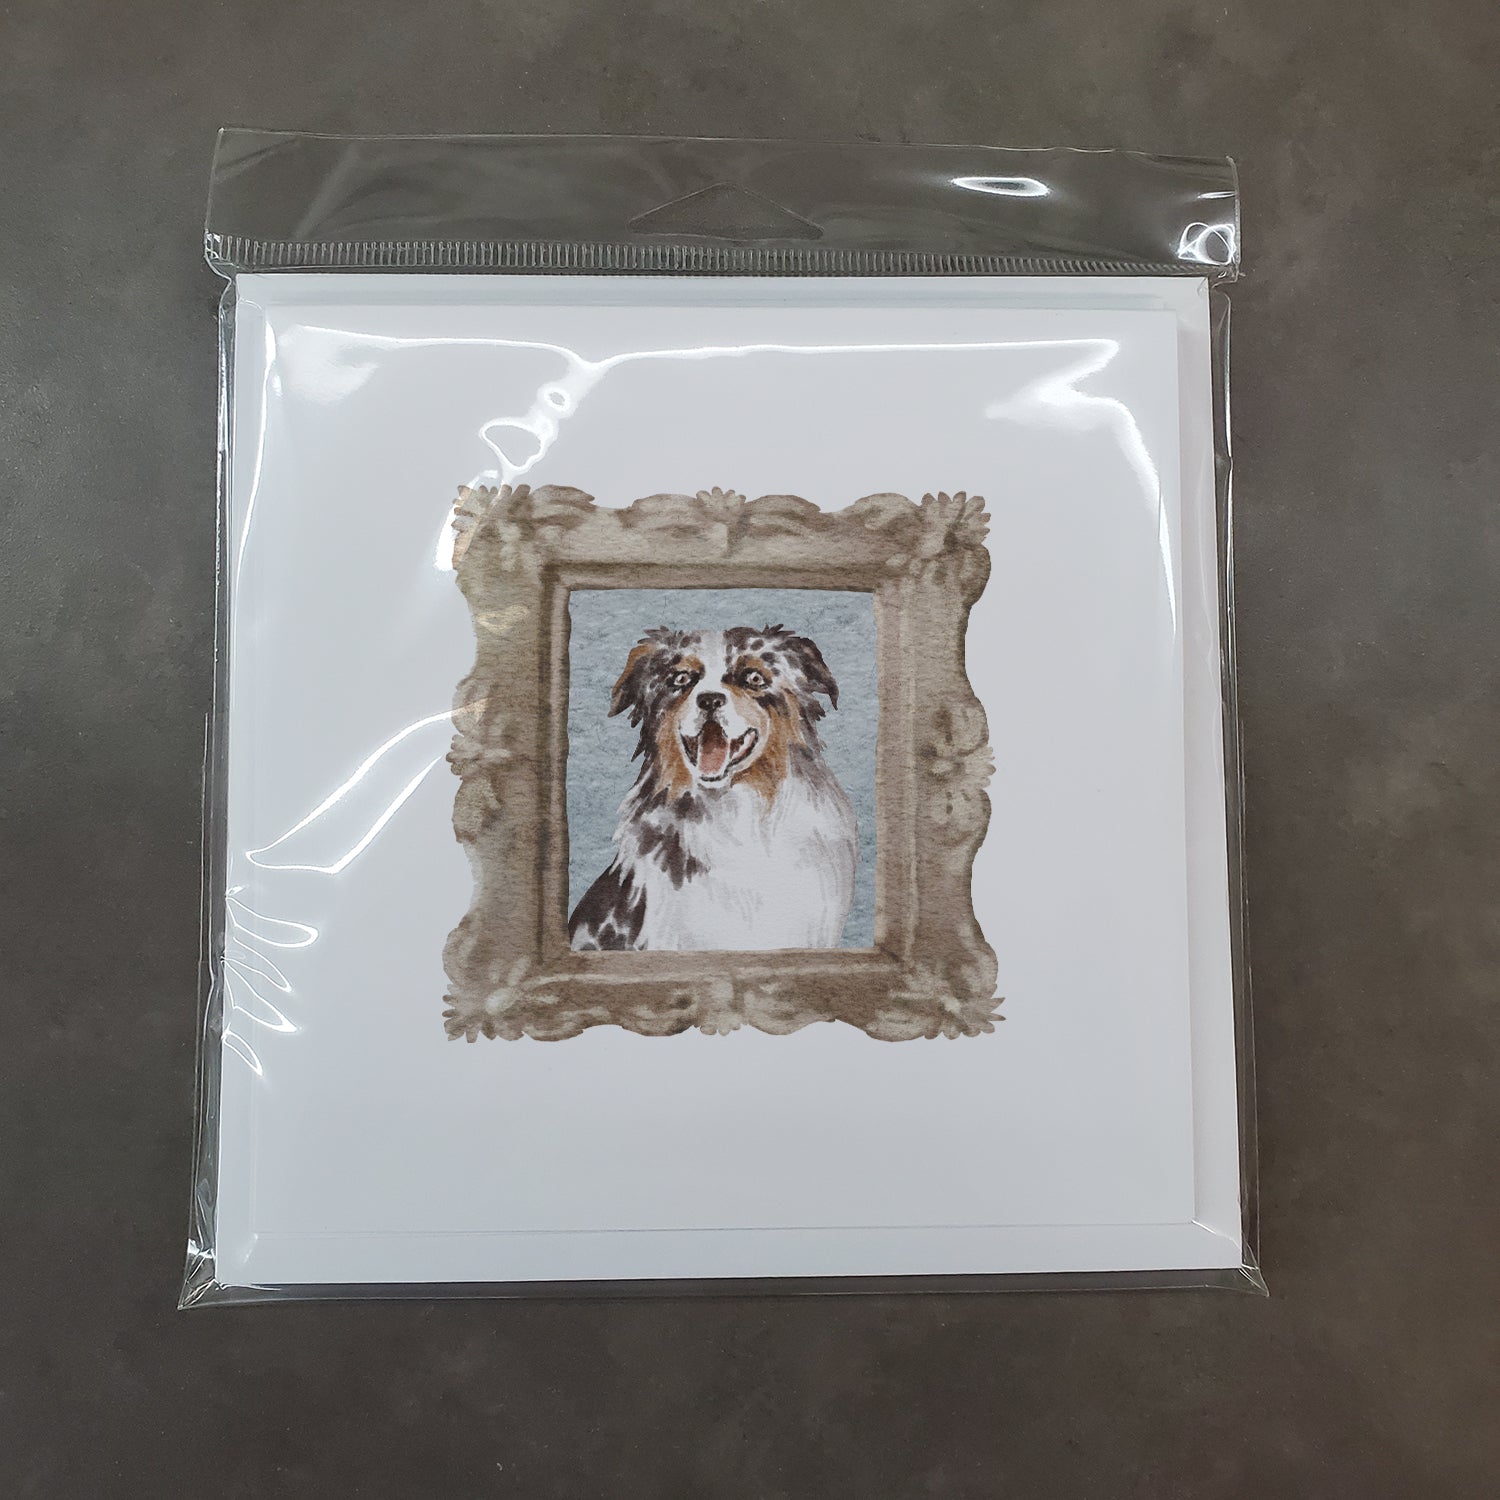 Australian Shepherd Merle Smile Square Greeting Cards and Envelopes Pack of 8 - the-store.com